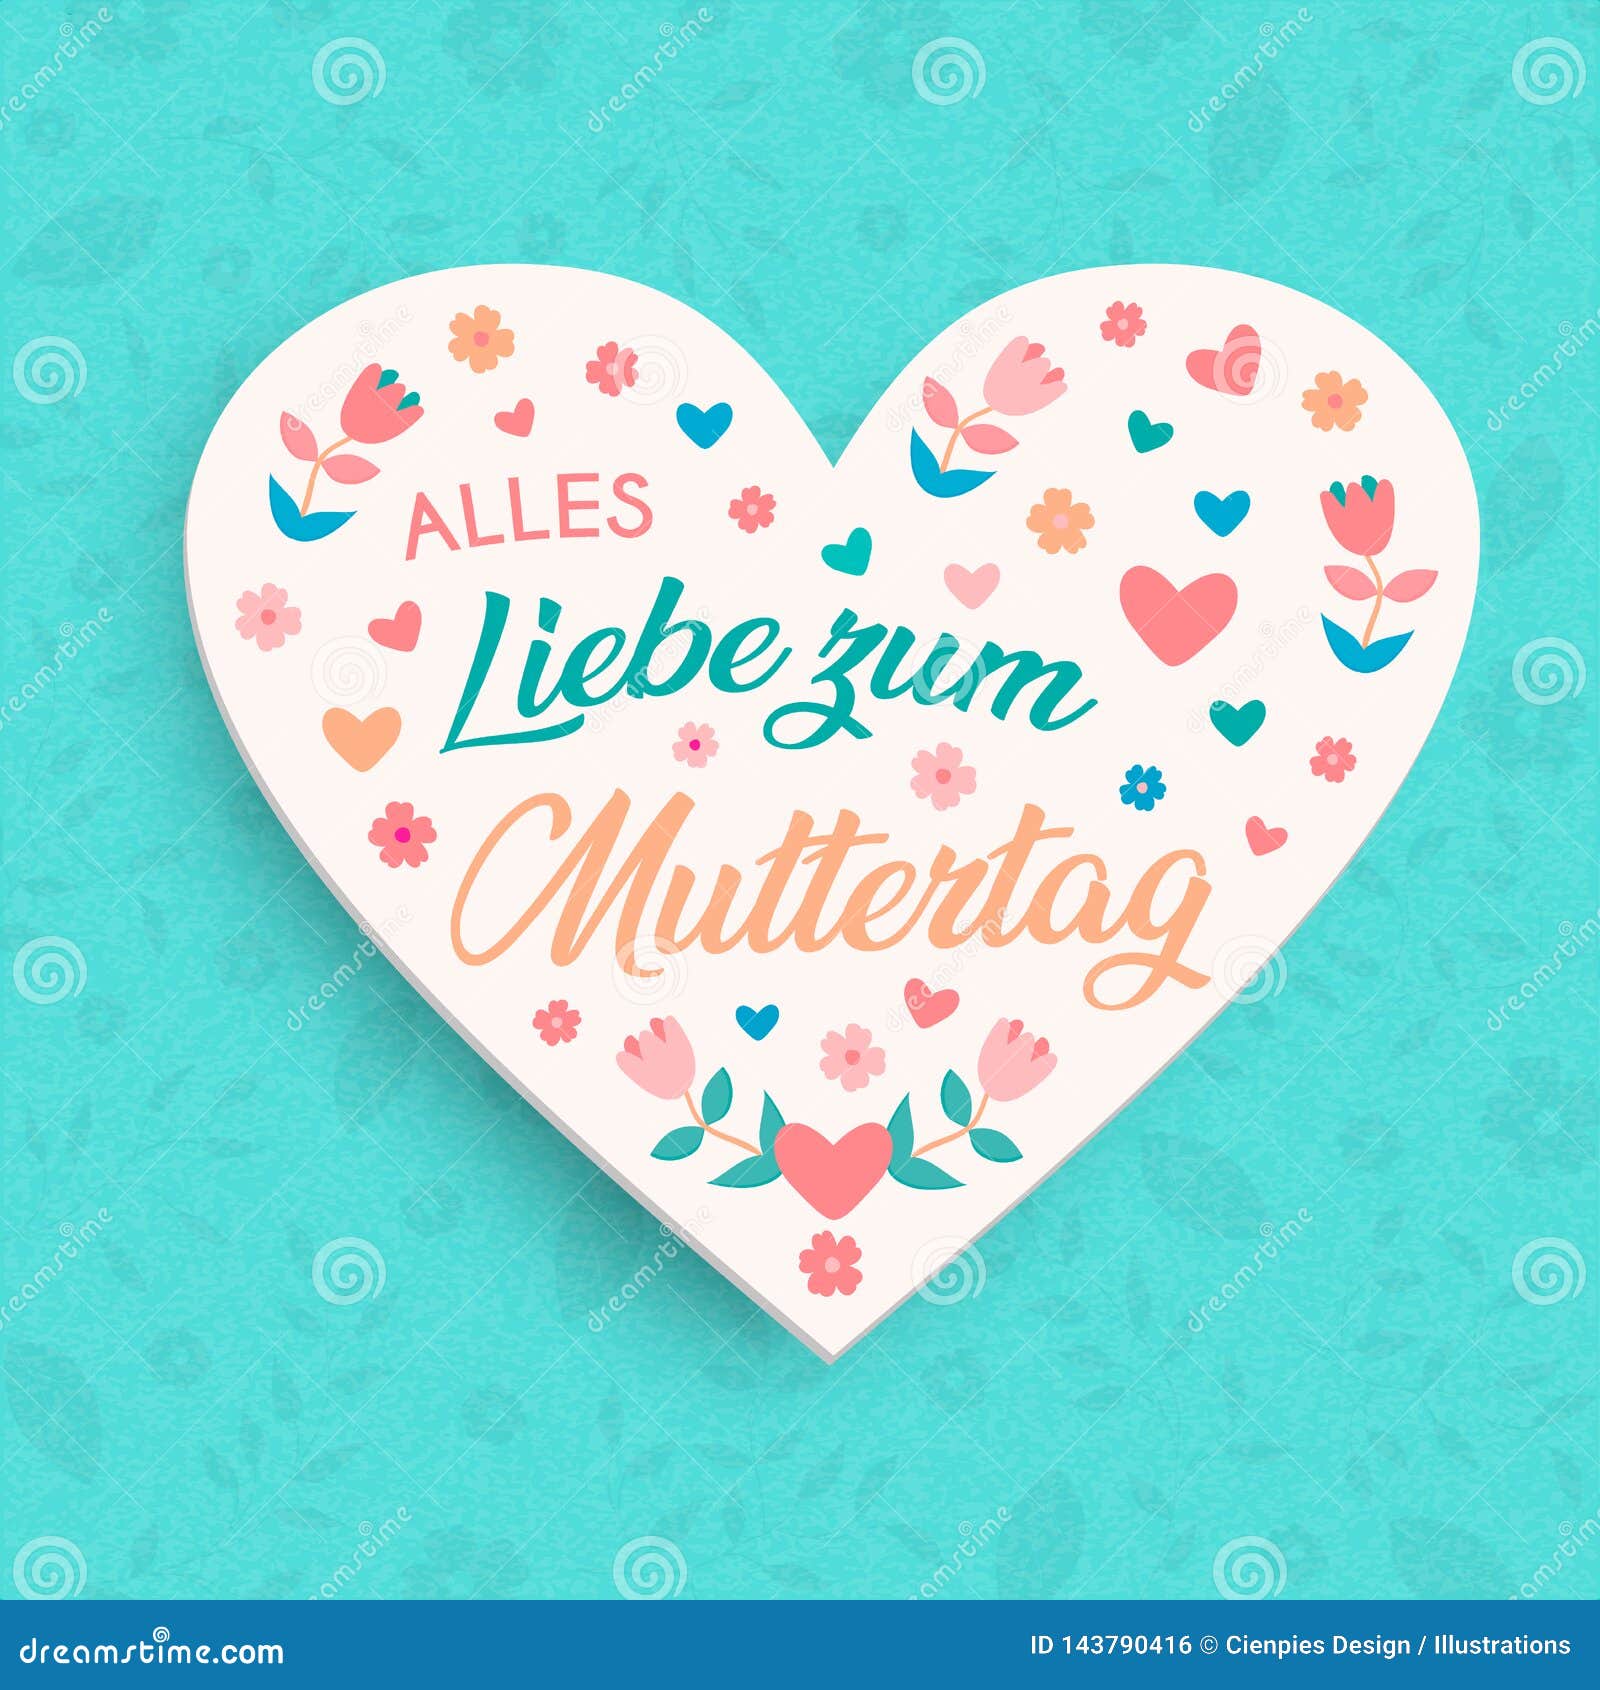 German Mothers Day Floral Card For Moms Love Stock Vector Illustration Of Floral Germany